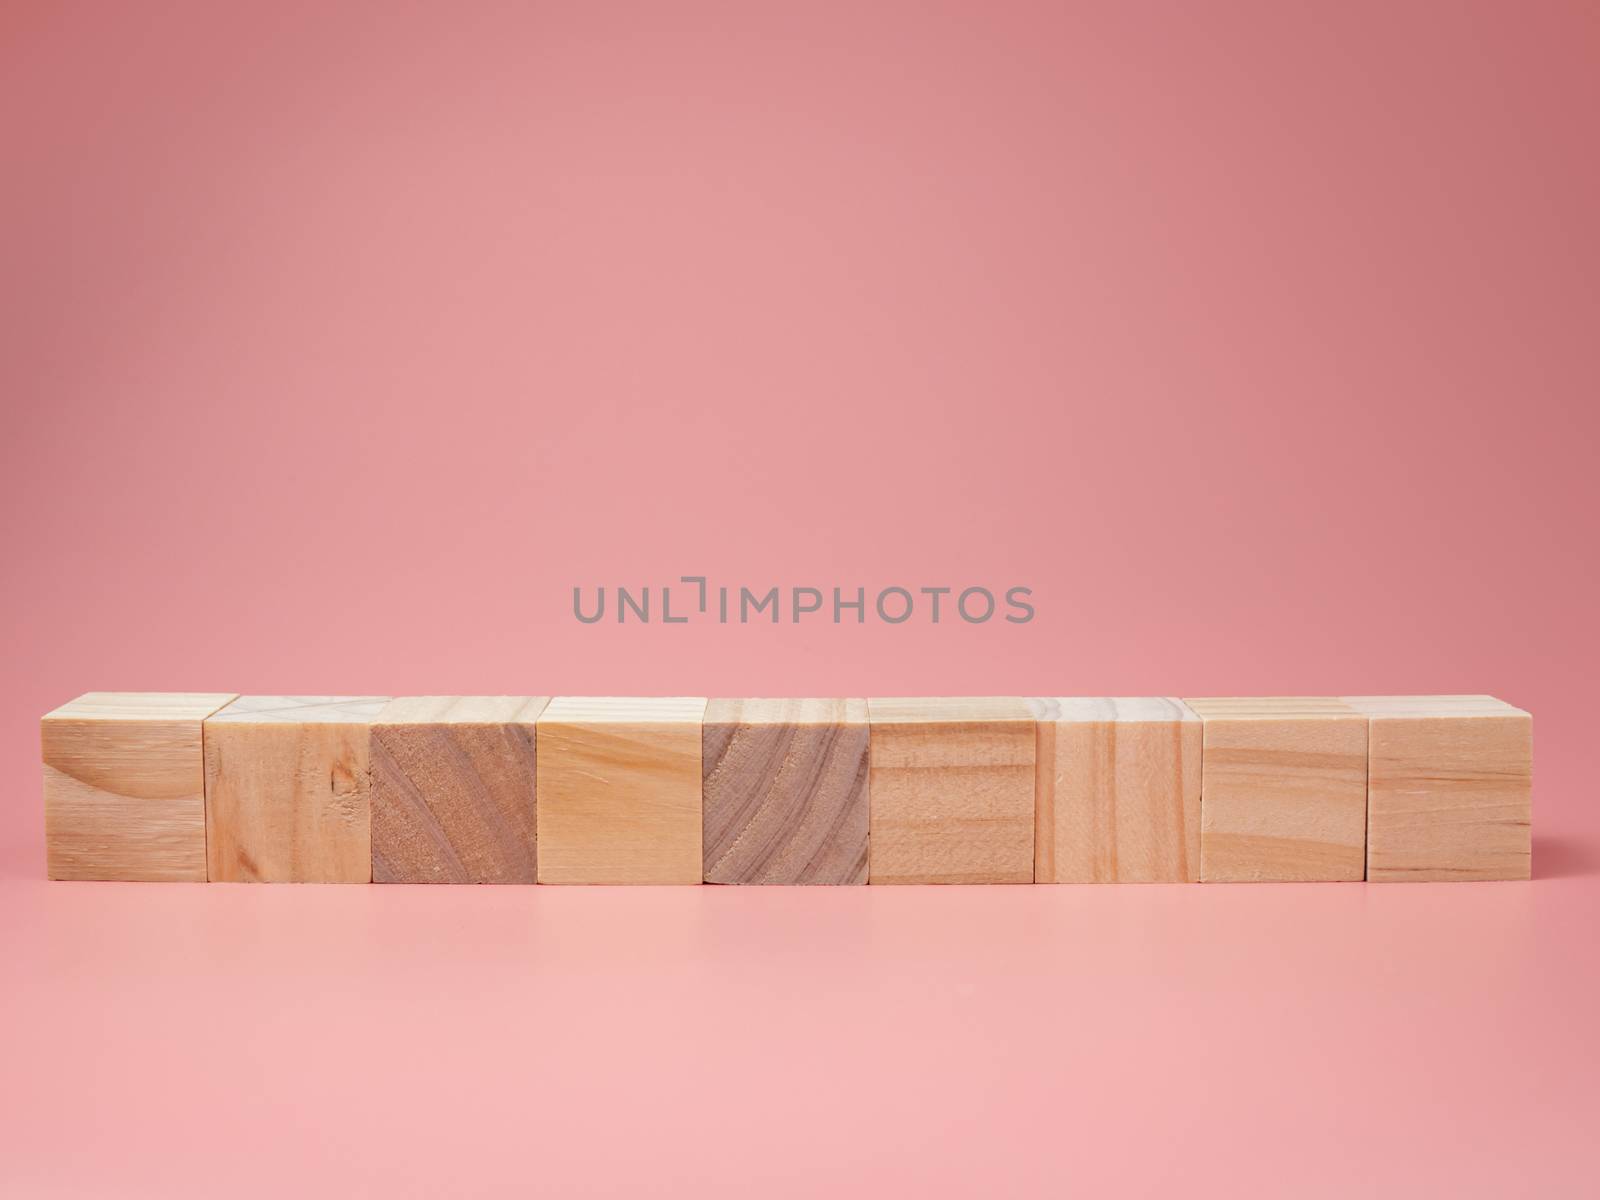 An empty wooden cube lined up on a pink background. For new idea by Unimages2527